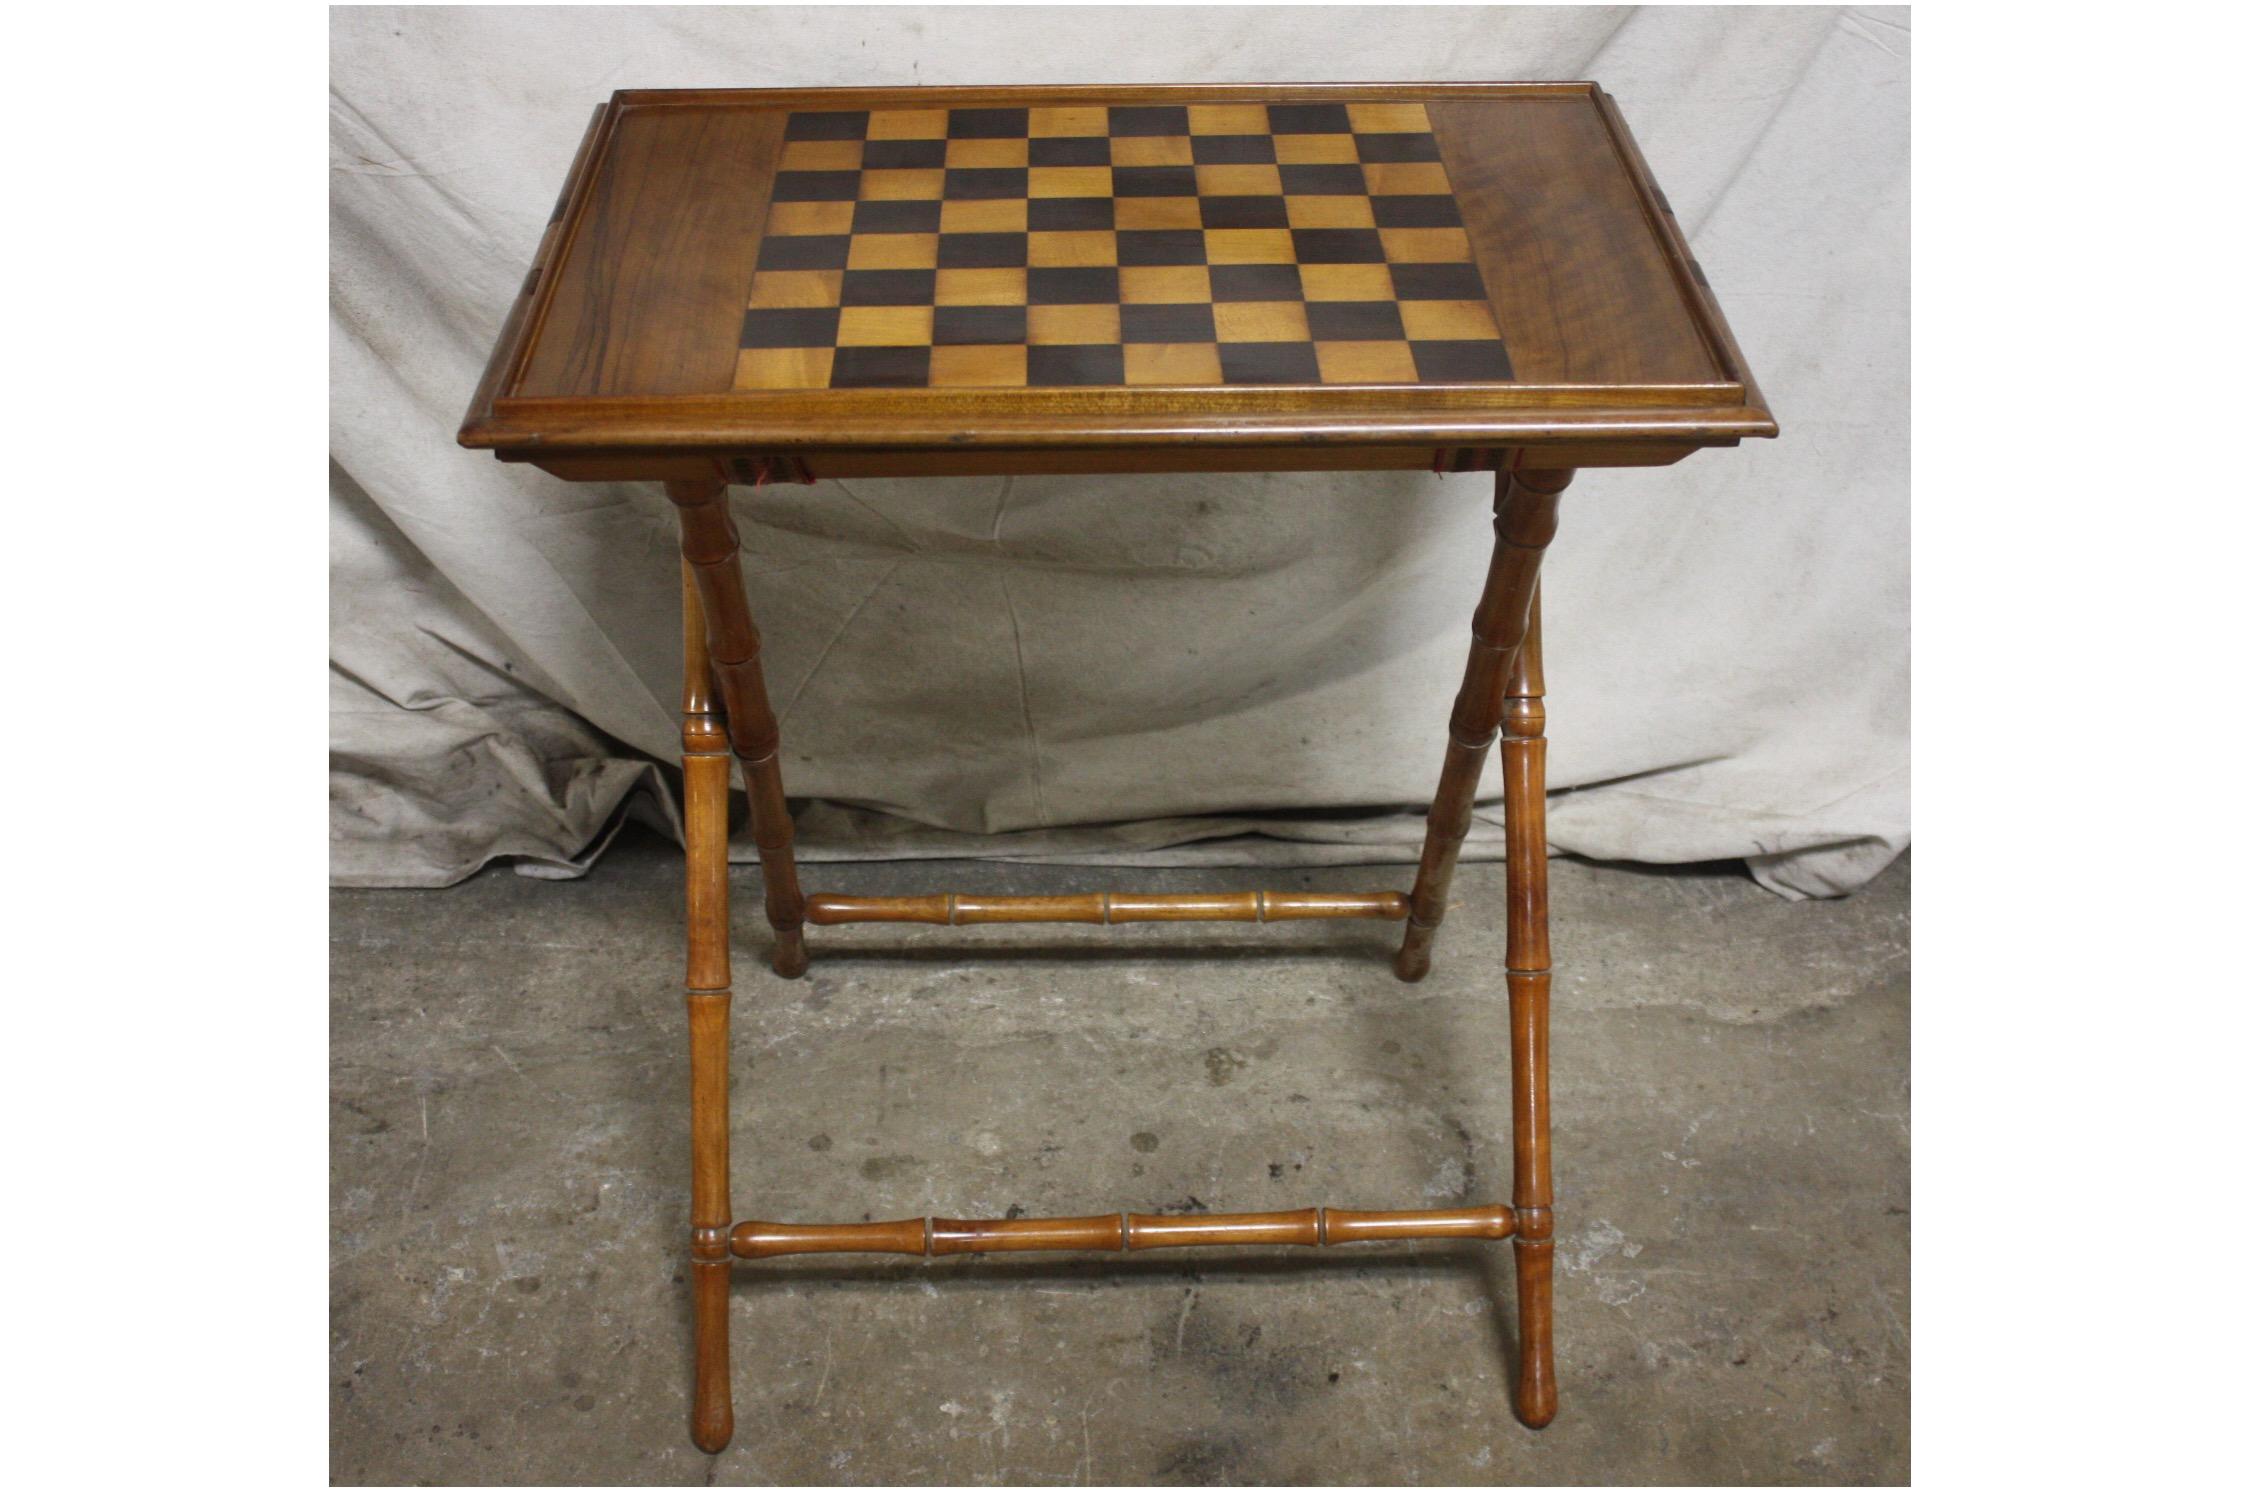 19th century French game table or tray table.